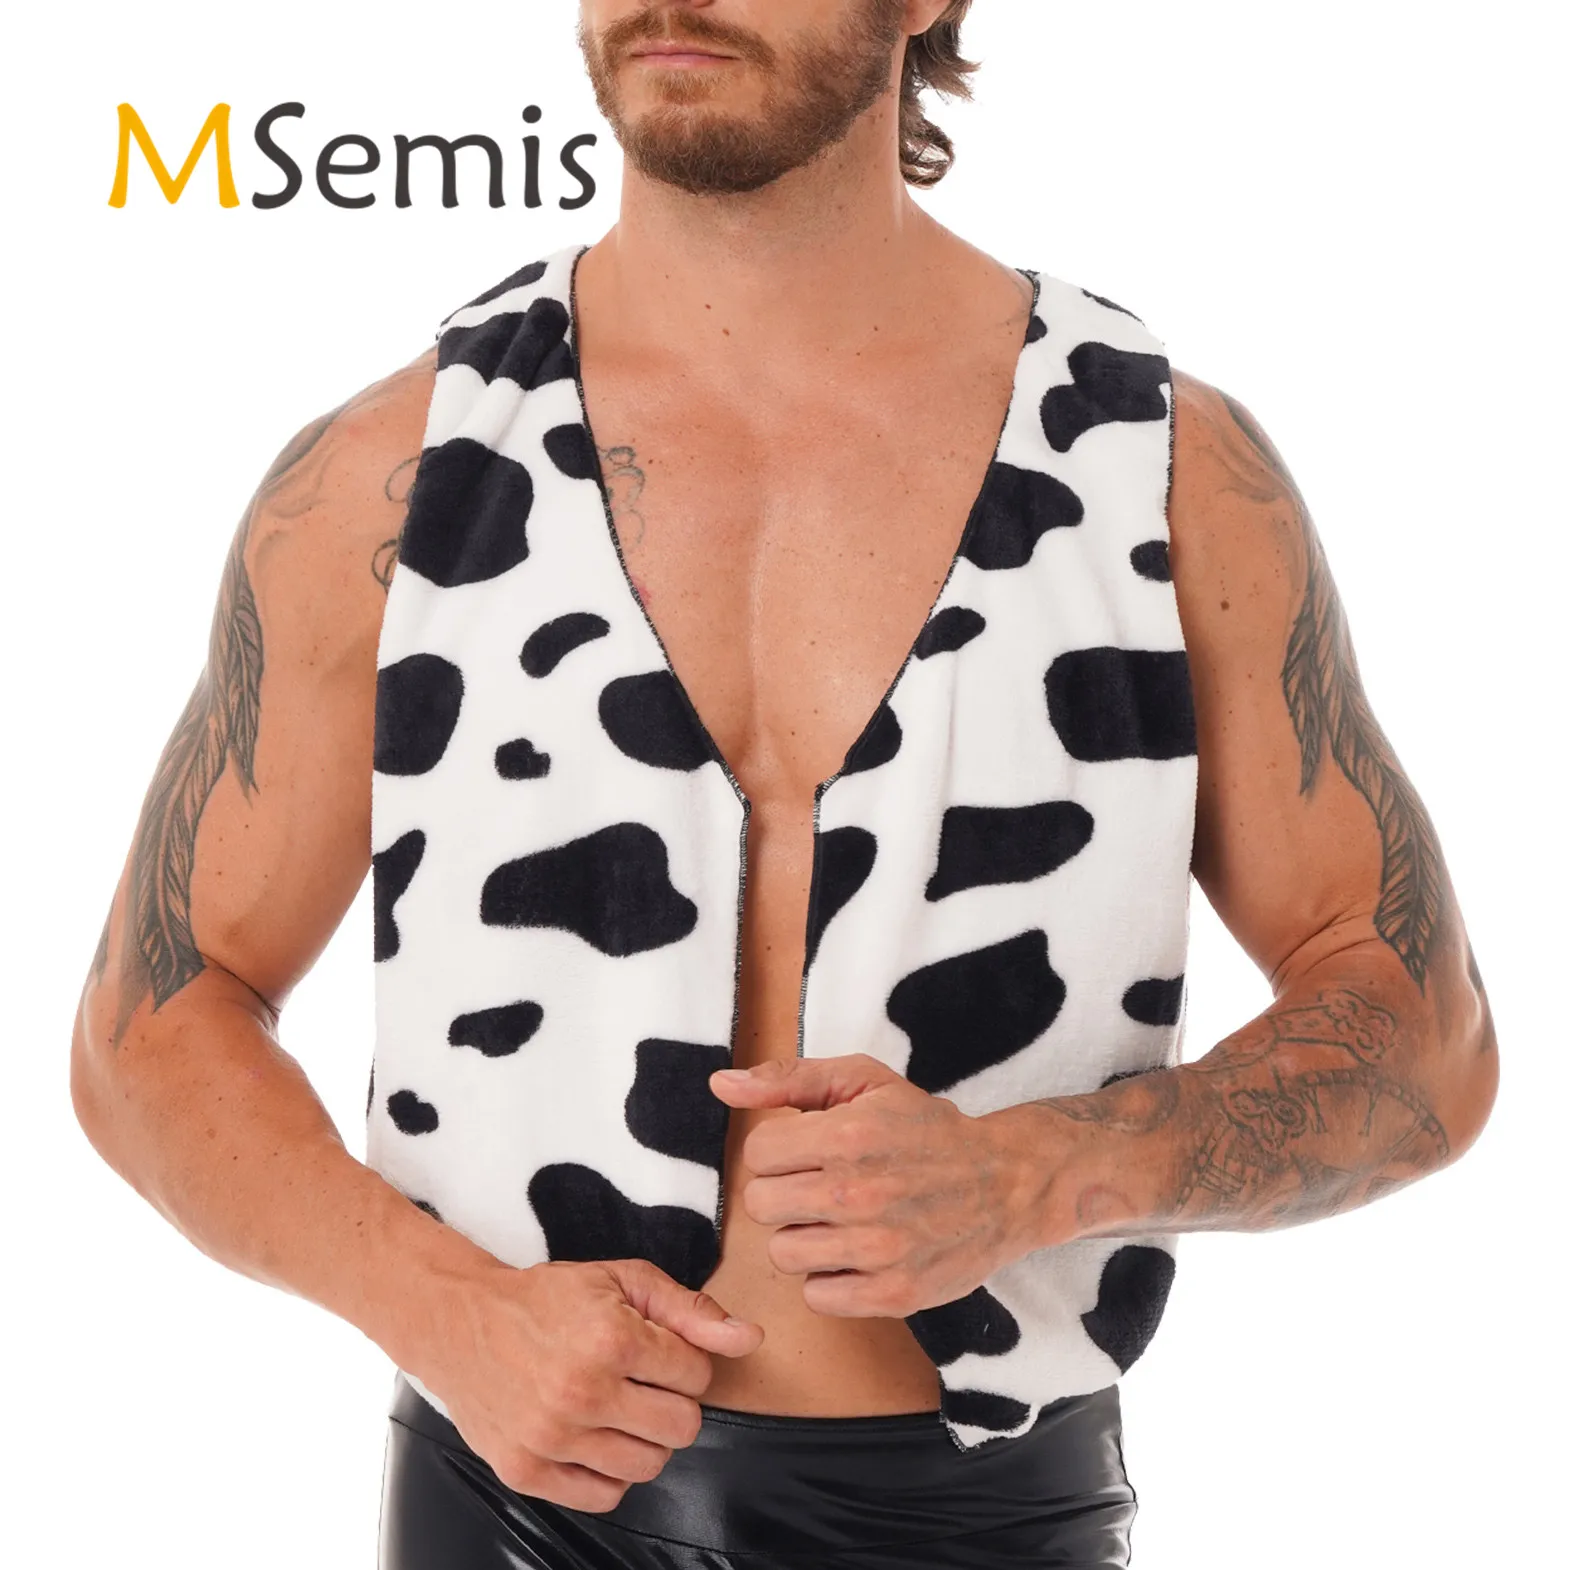 Mens Tank Top Fancy Dress Ball Cosplay Roleplay Costume Open Front V Neck Sleeveless Vest Cow Printed Flannel Waistcoat Tops